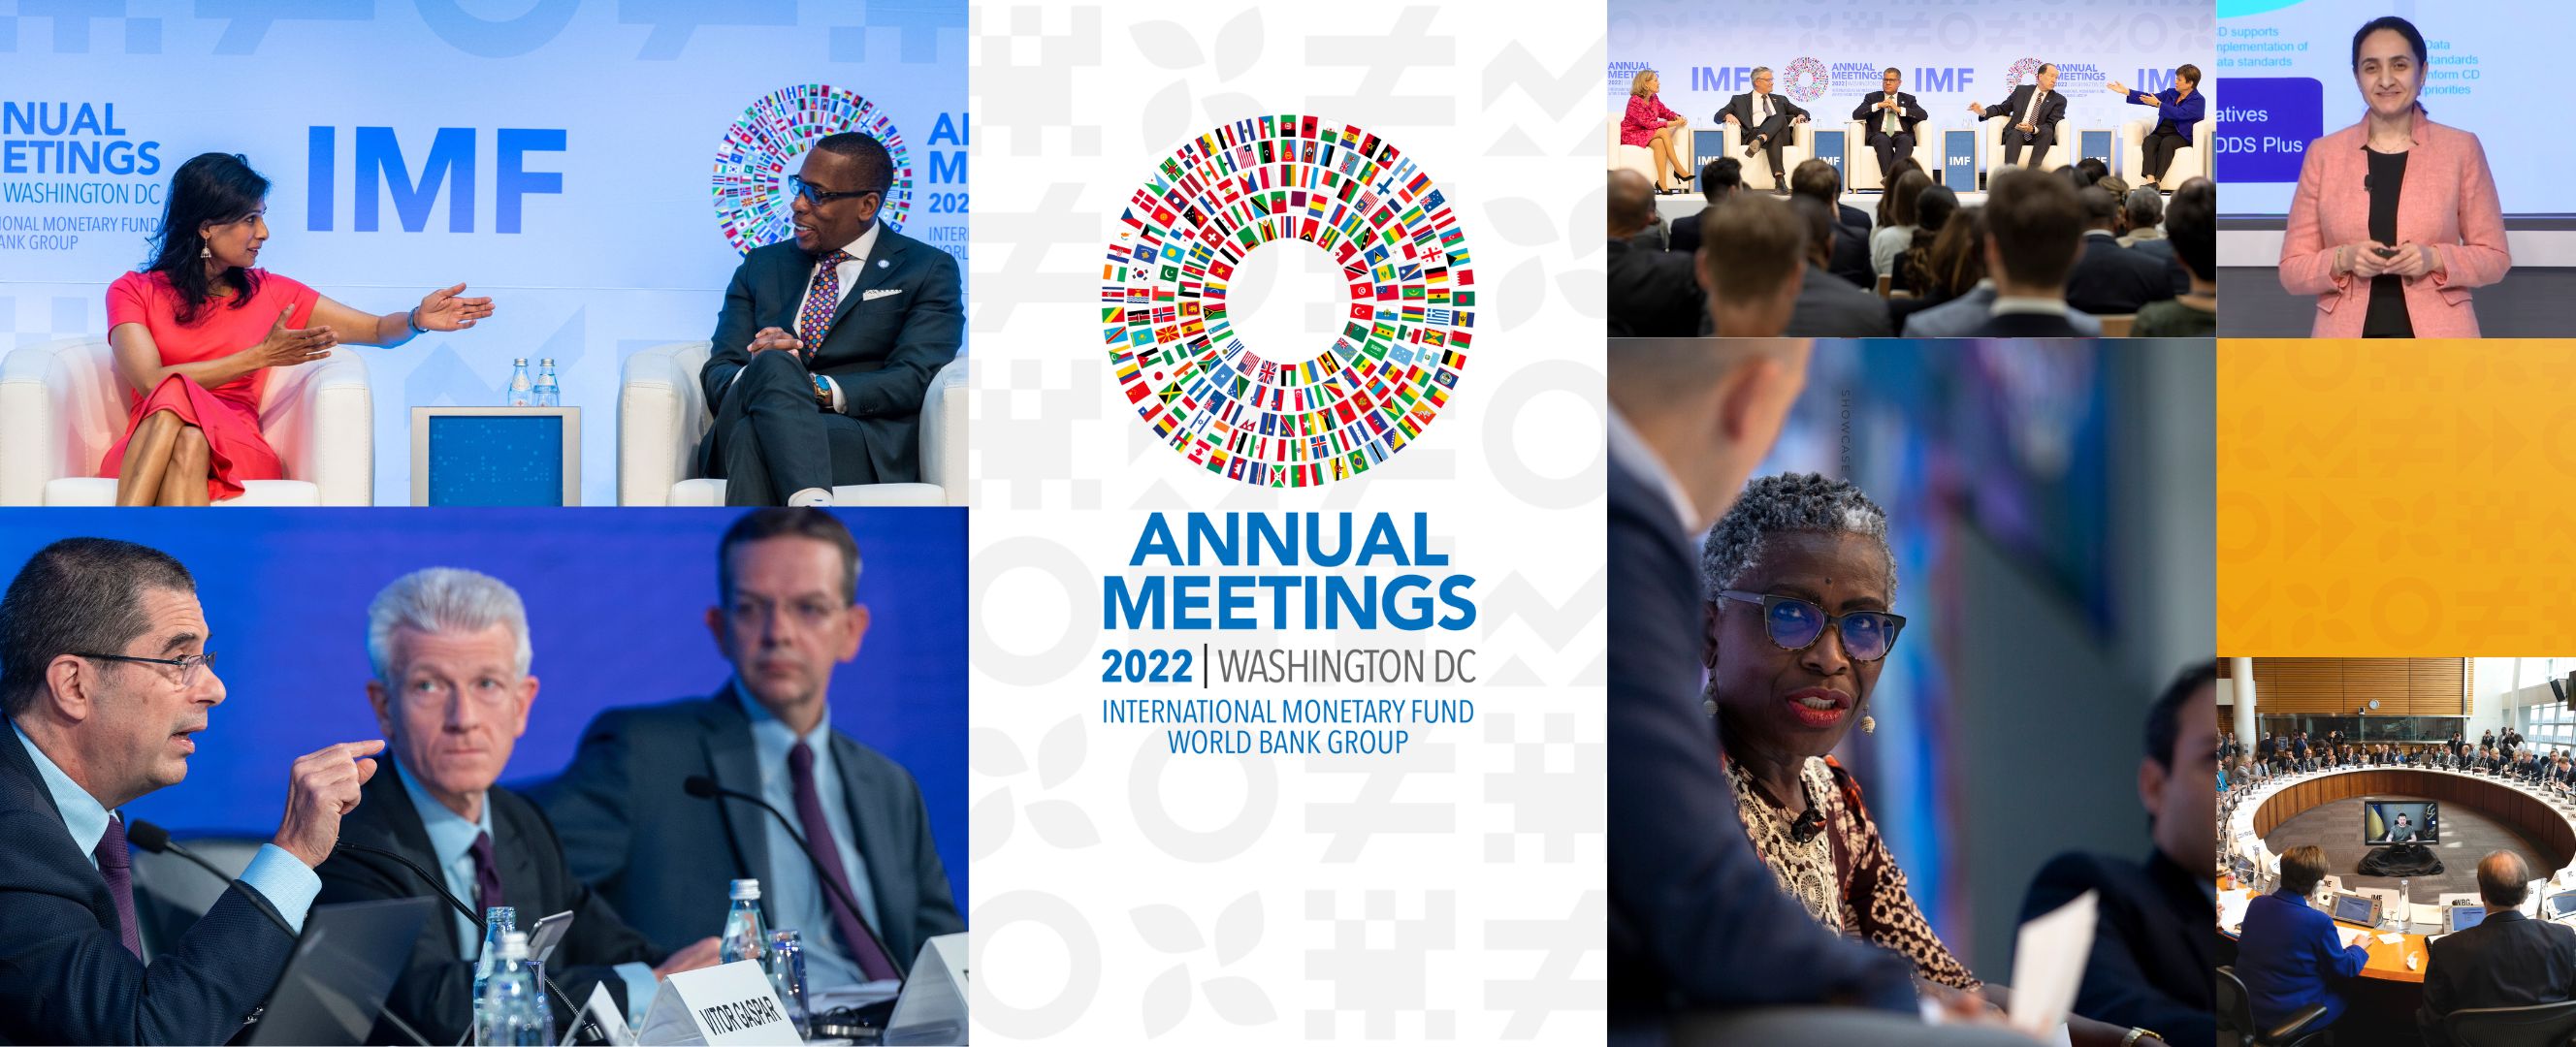 IMF Annual Meetings 2022 Daily Updates